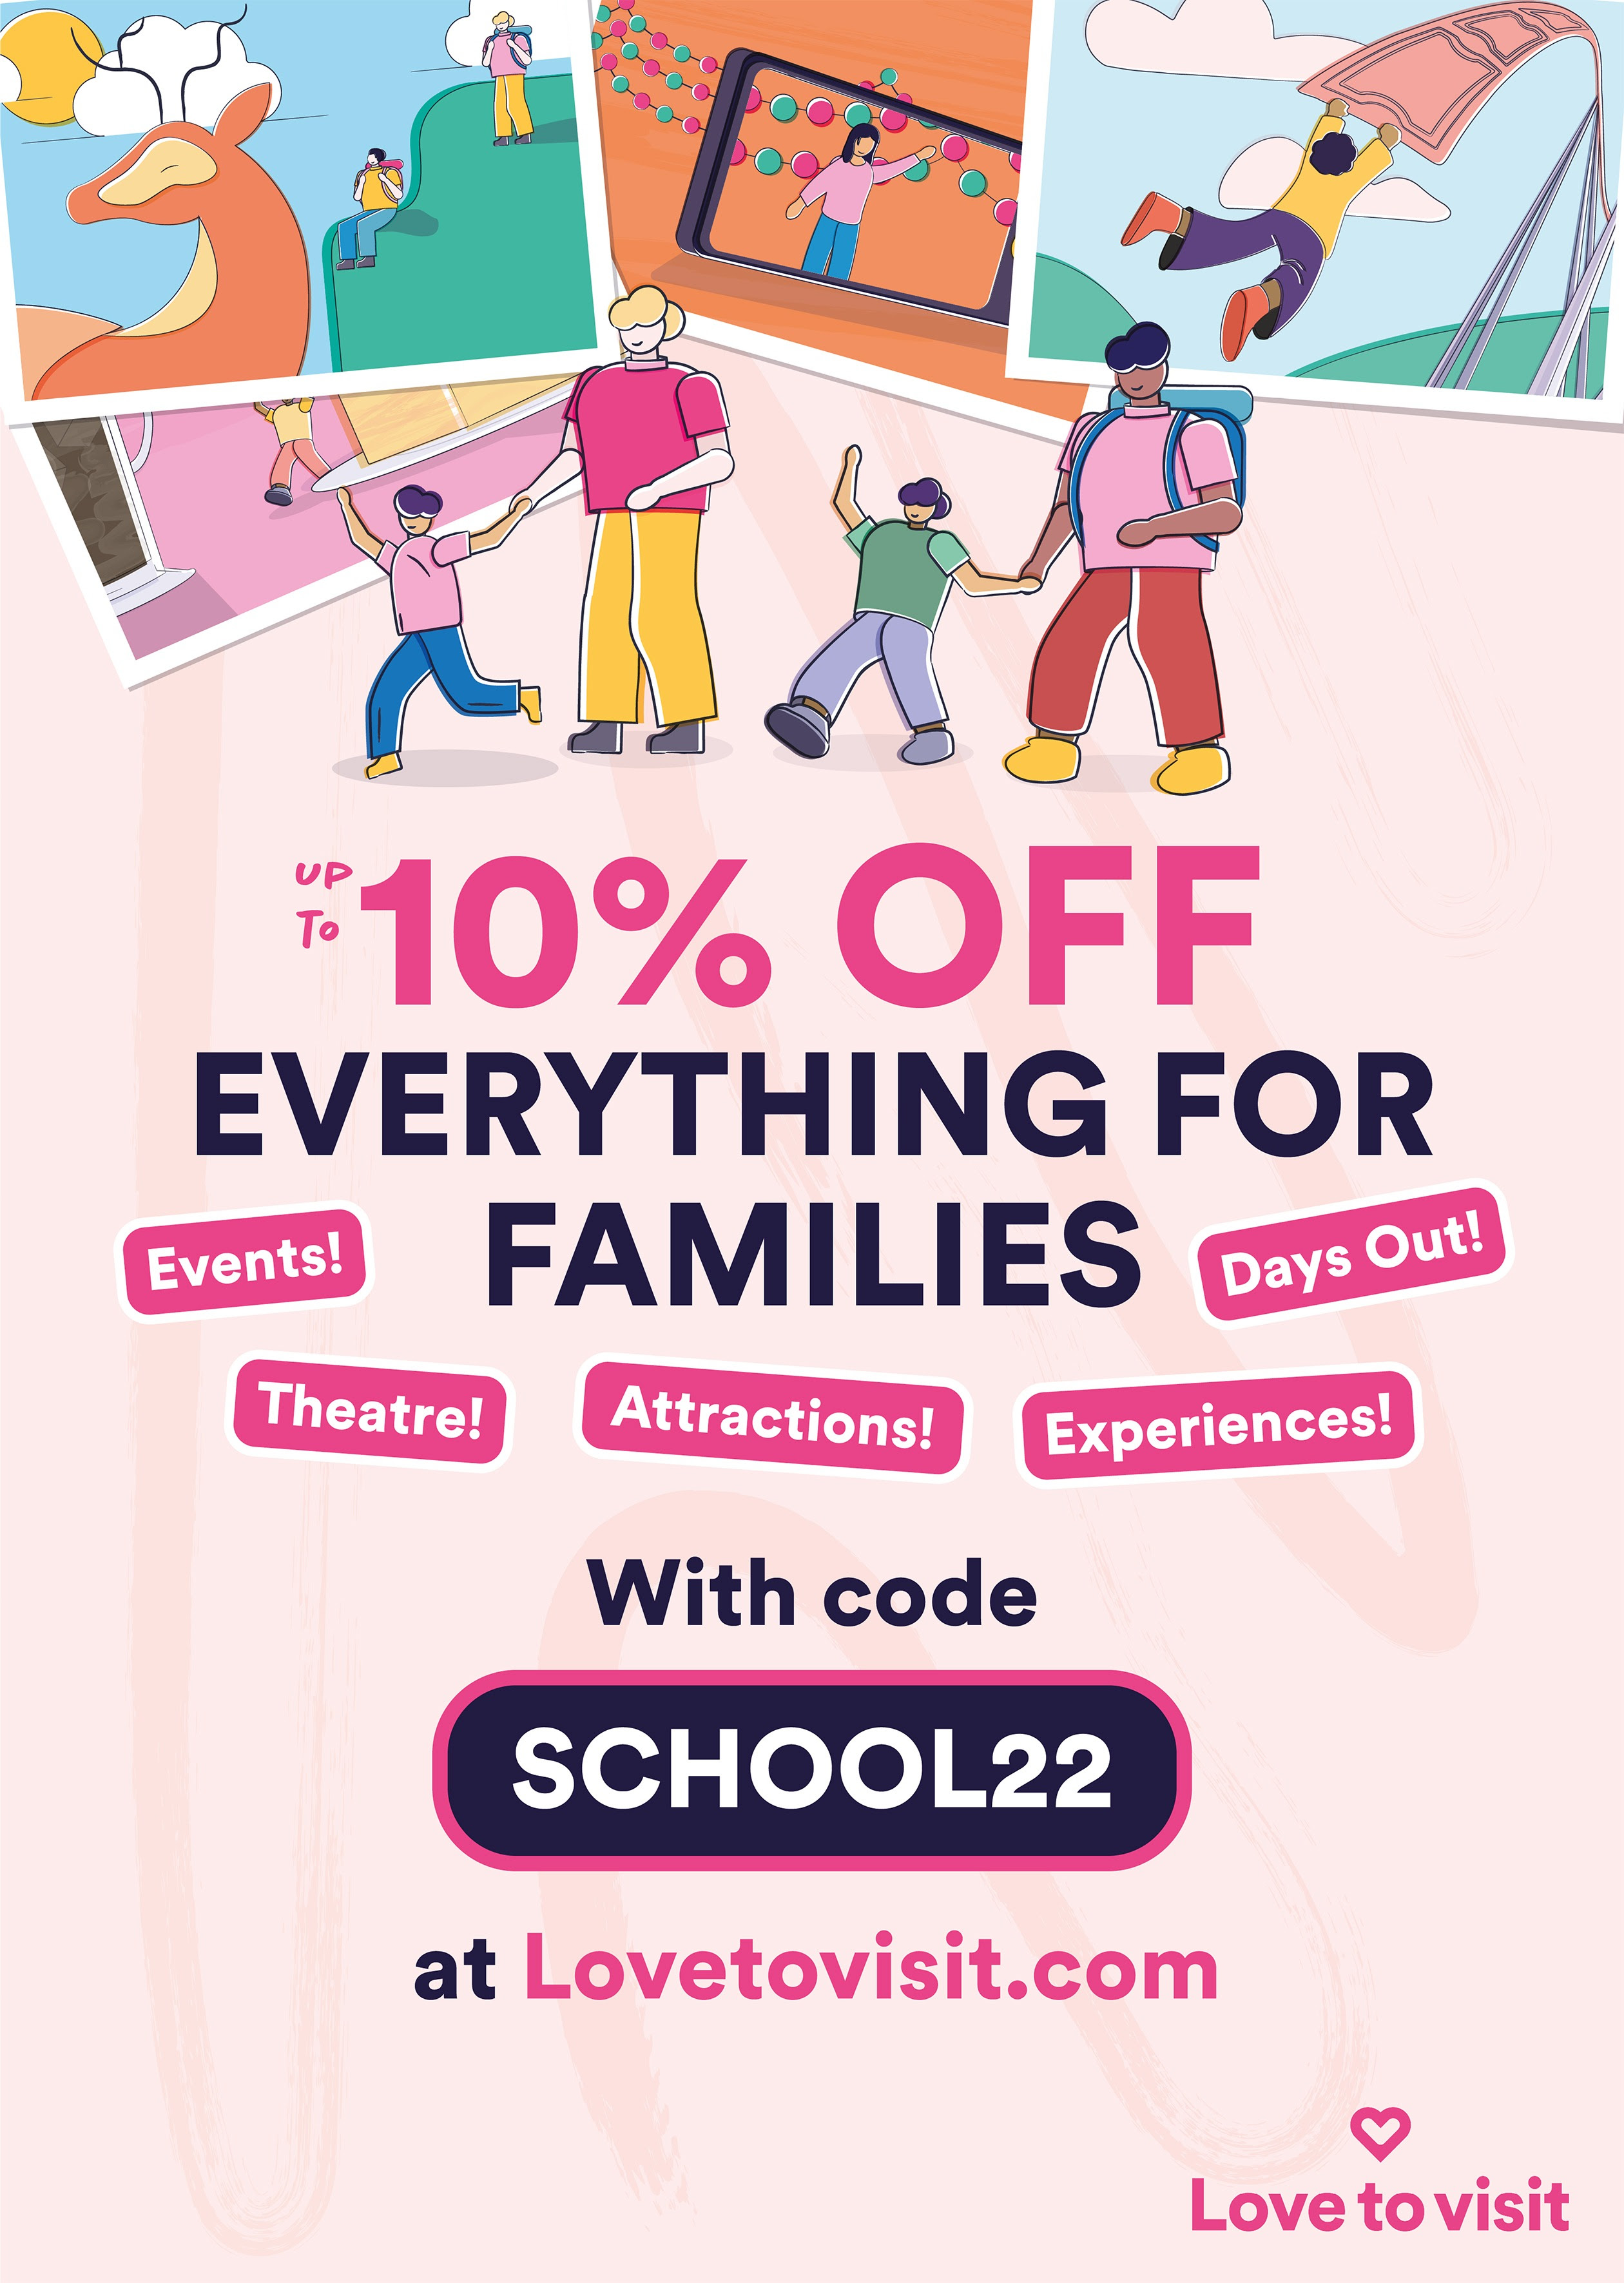 Poster containing various illustrations representing different activities and days out, as well as the schools discount code